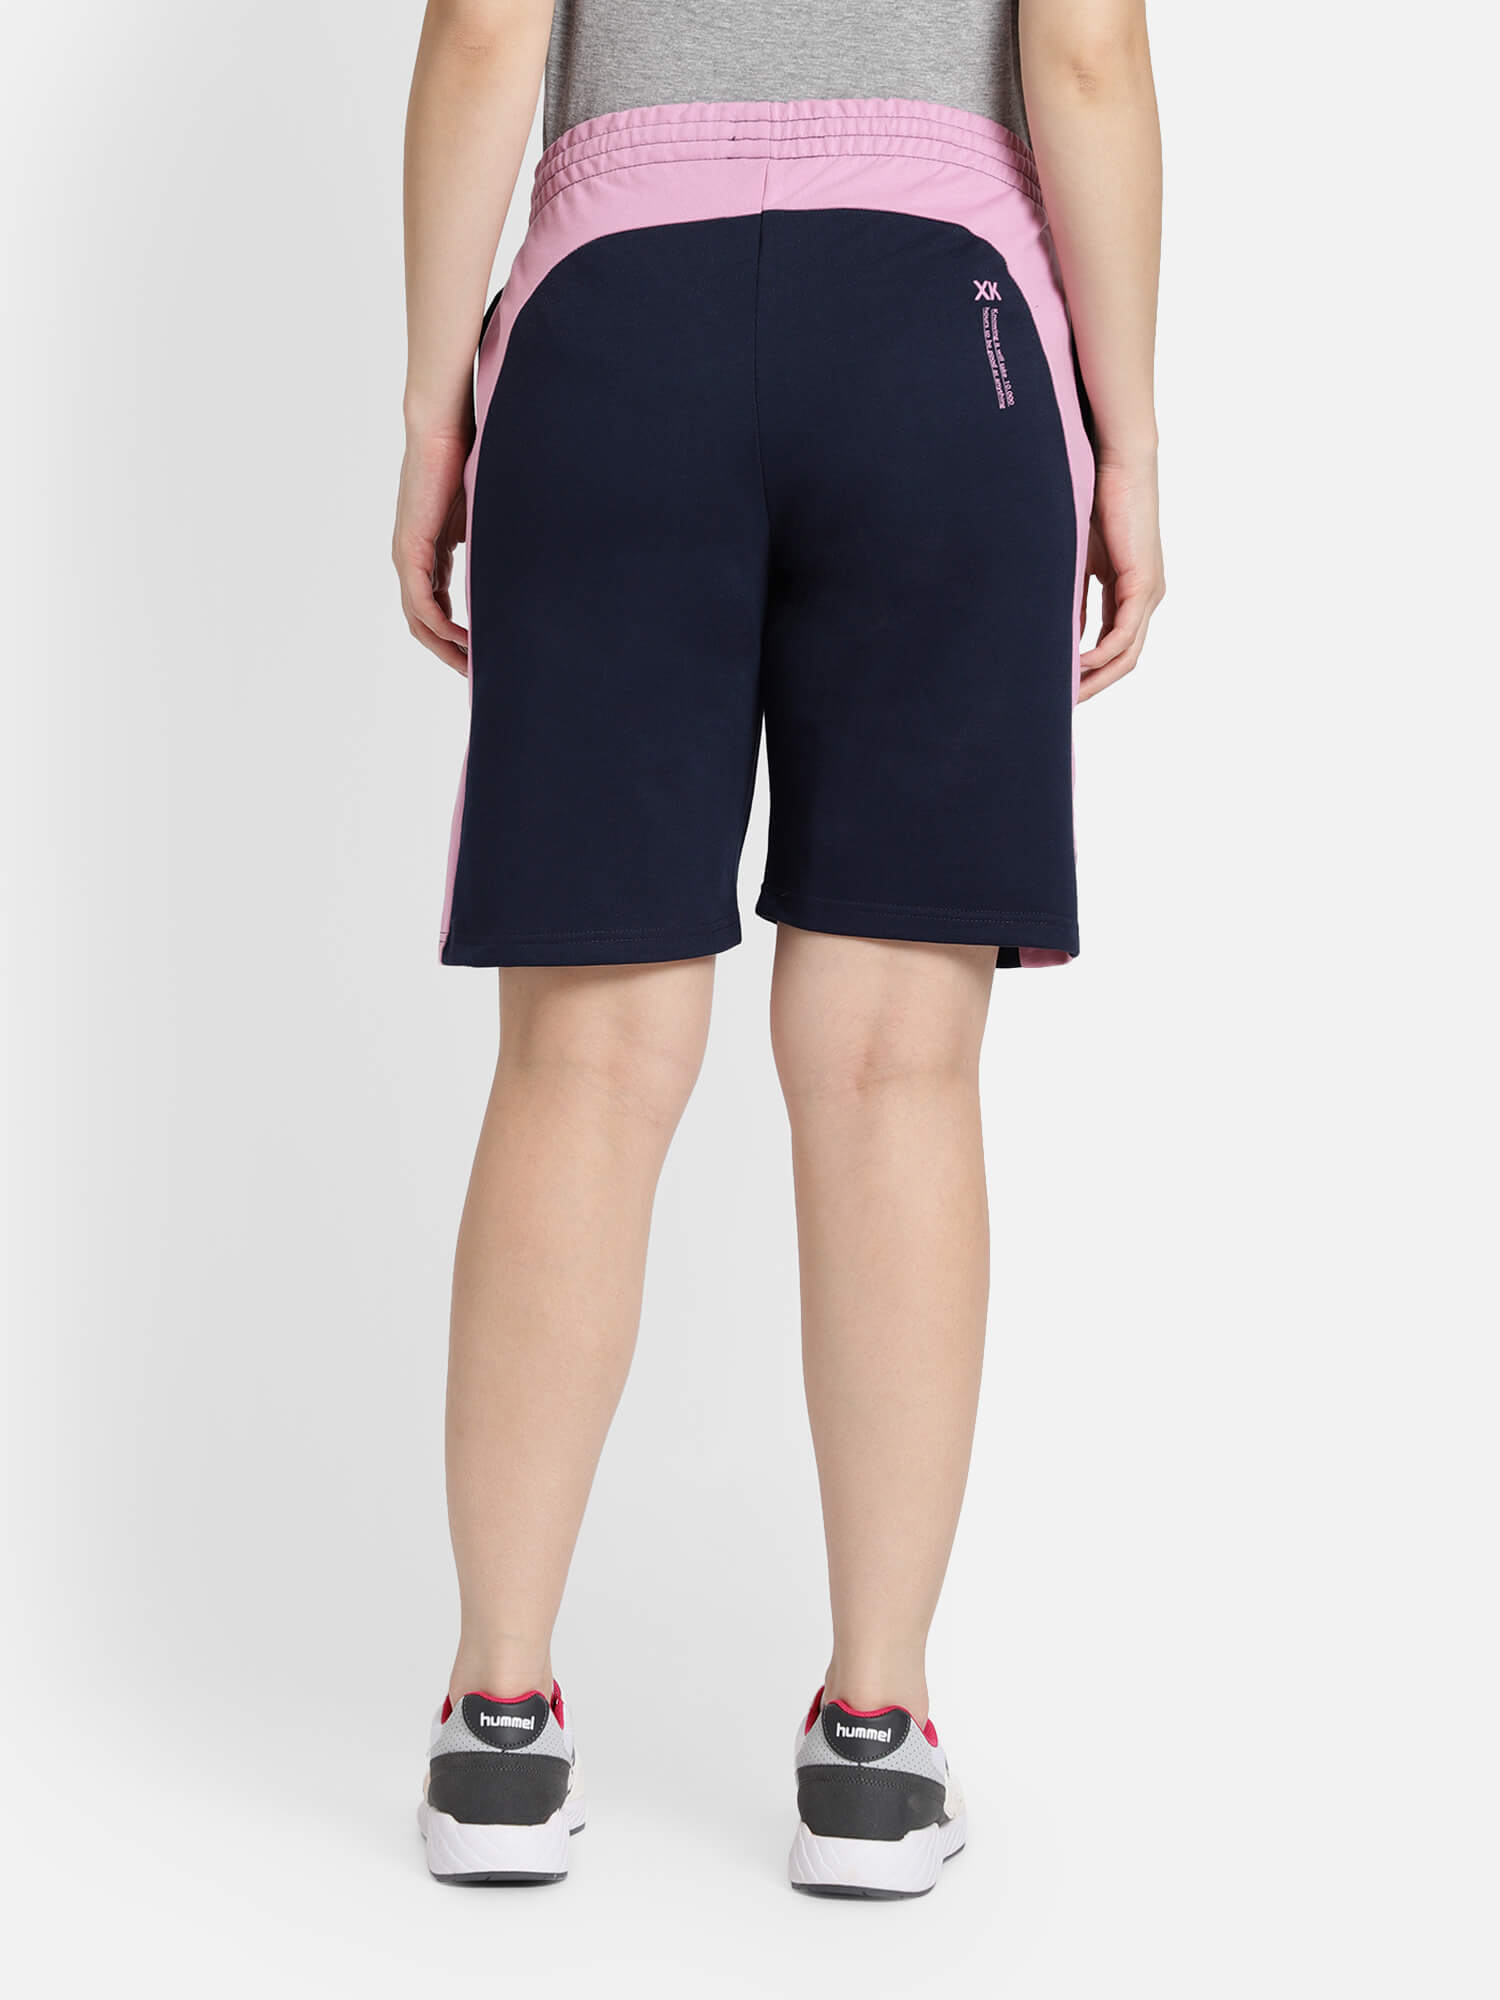 Action Cotton Blue/Lilac Shorts for Women